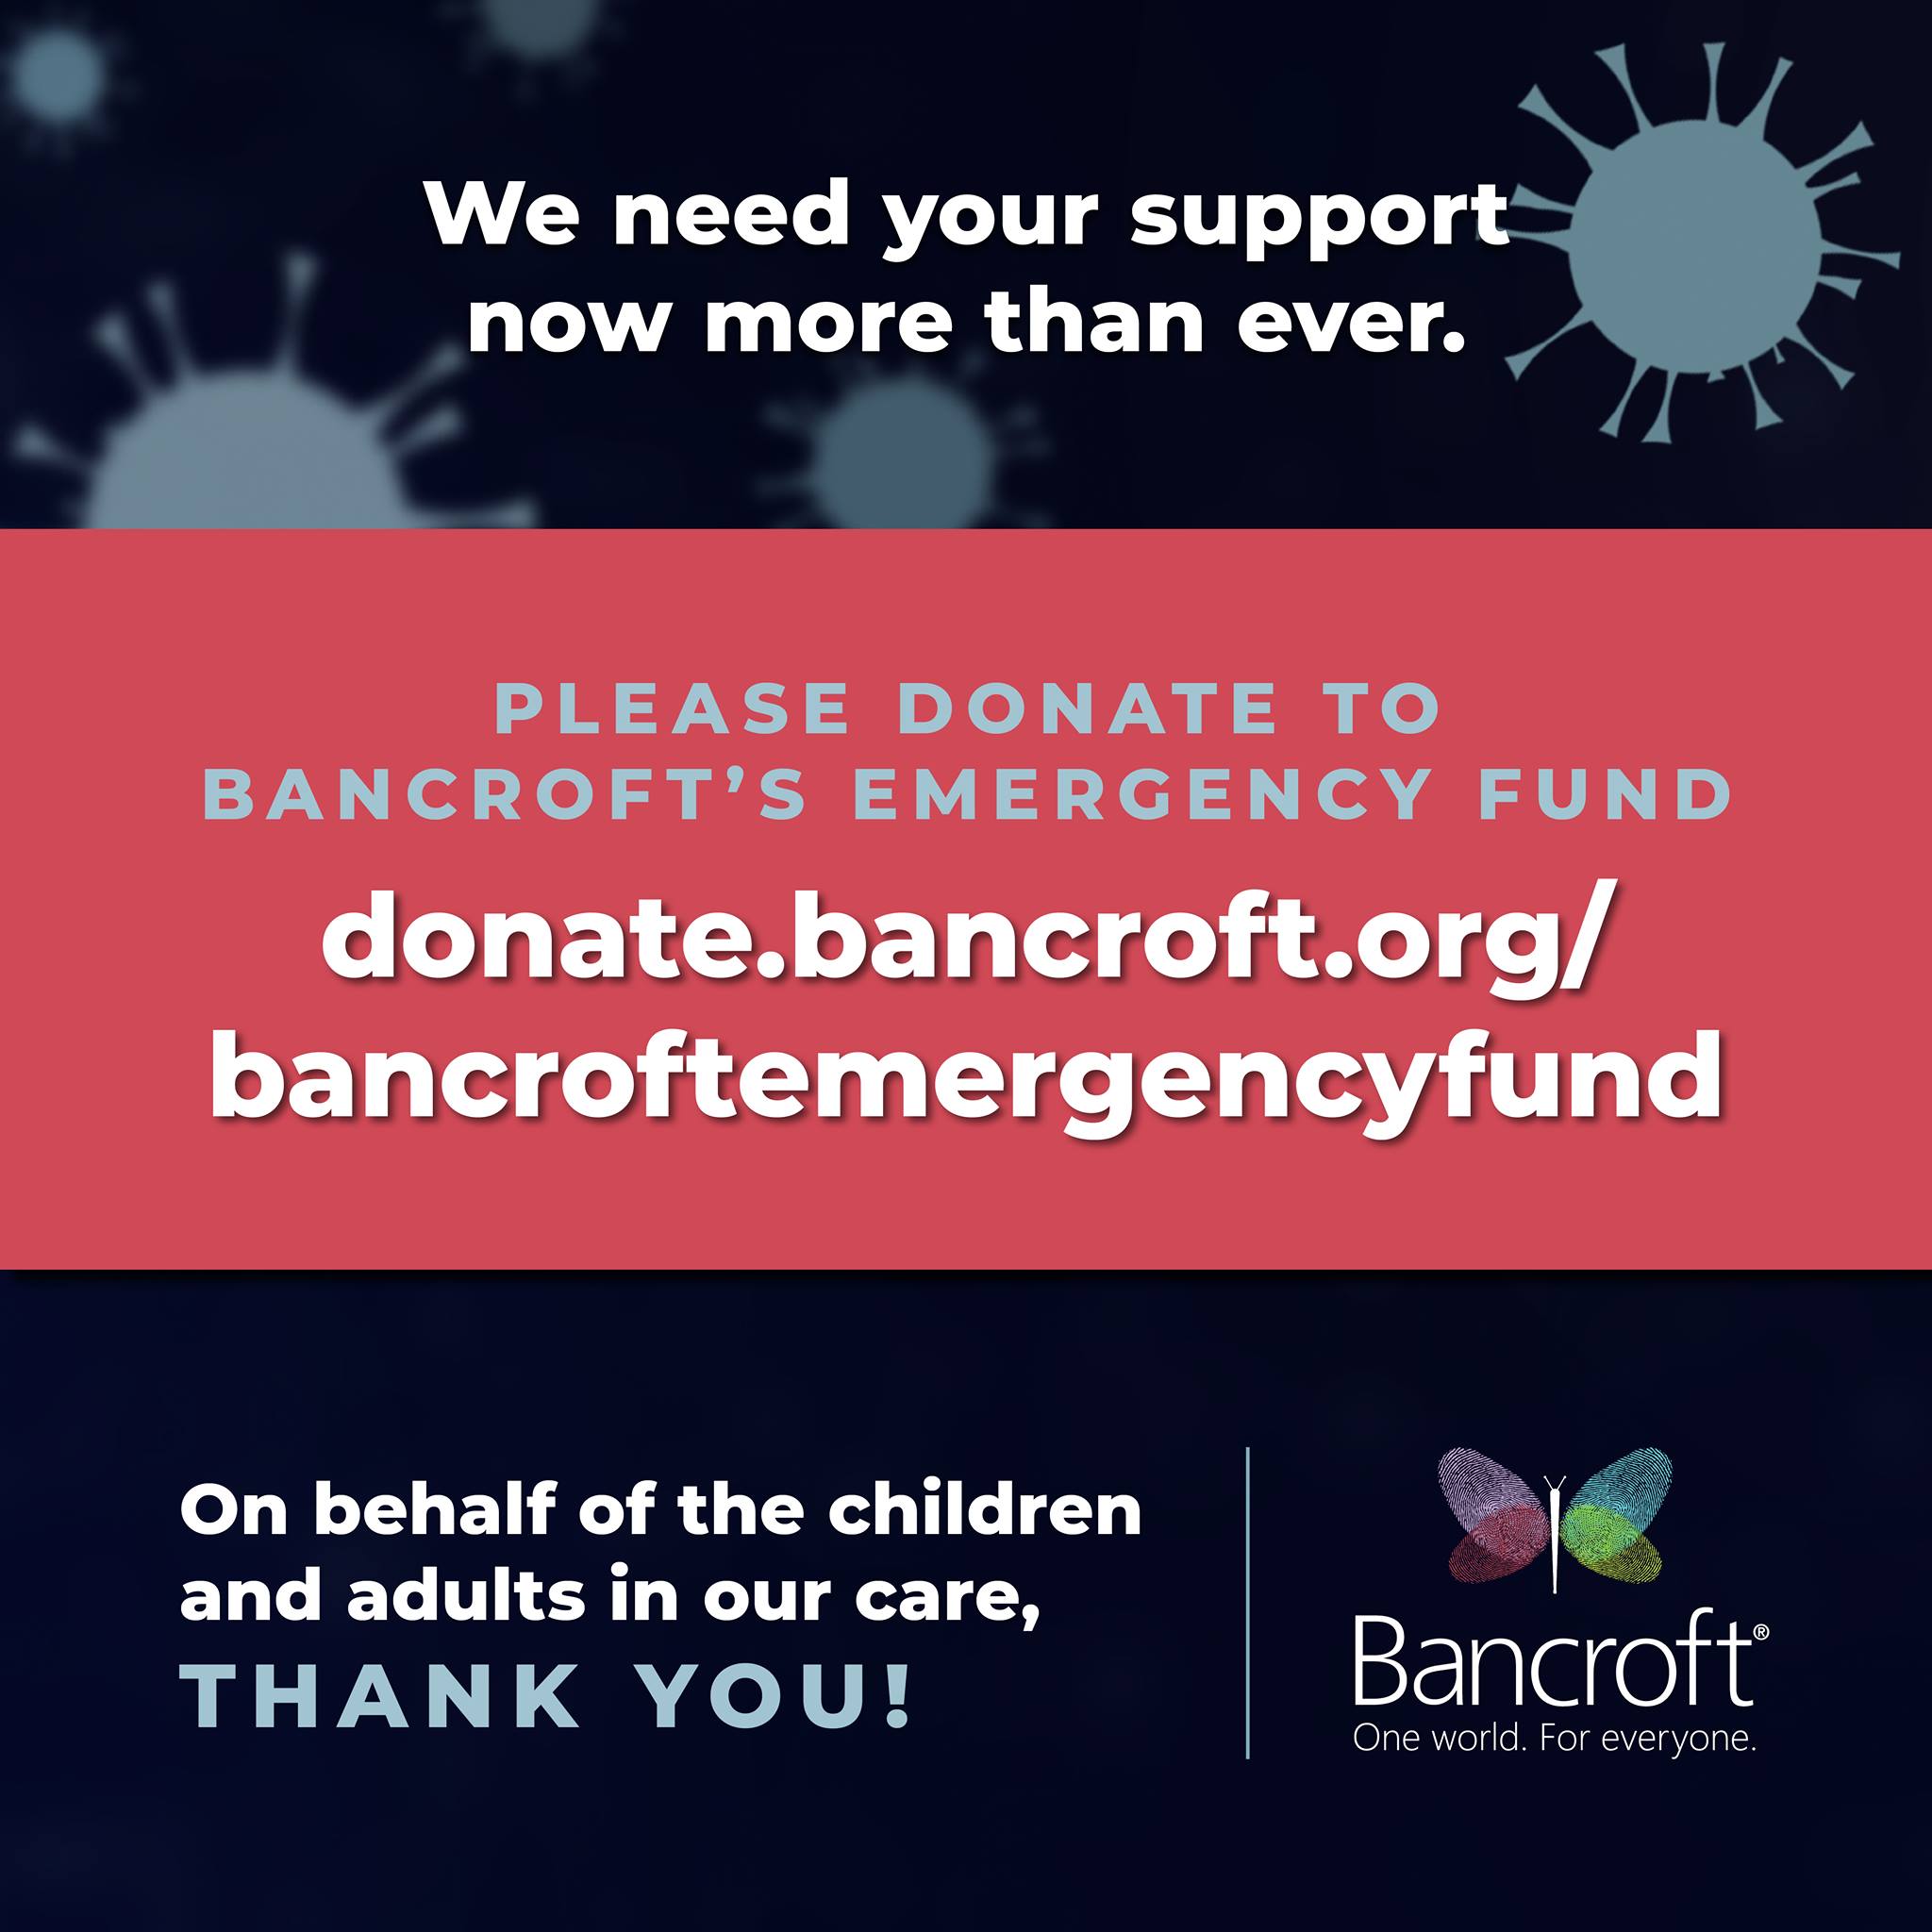 Dark blue and red graphic reading "We need your support now more than ever. Please donate to Bancroft's emergency fund donate.bancroft.org/bancroftemergencyfund. On the behalf of the children and adults in our care THANK YOU!"